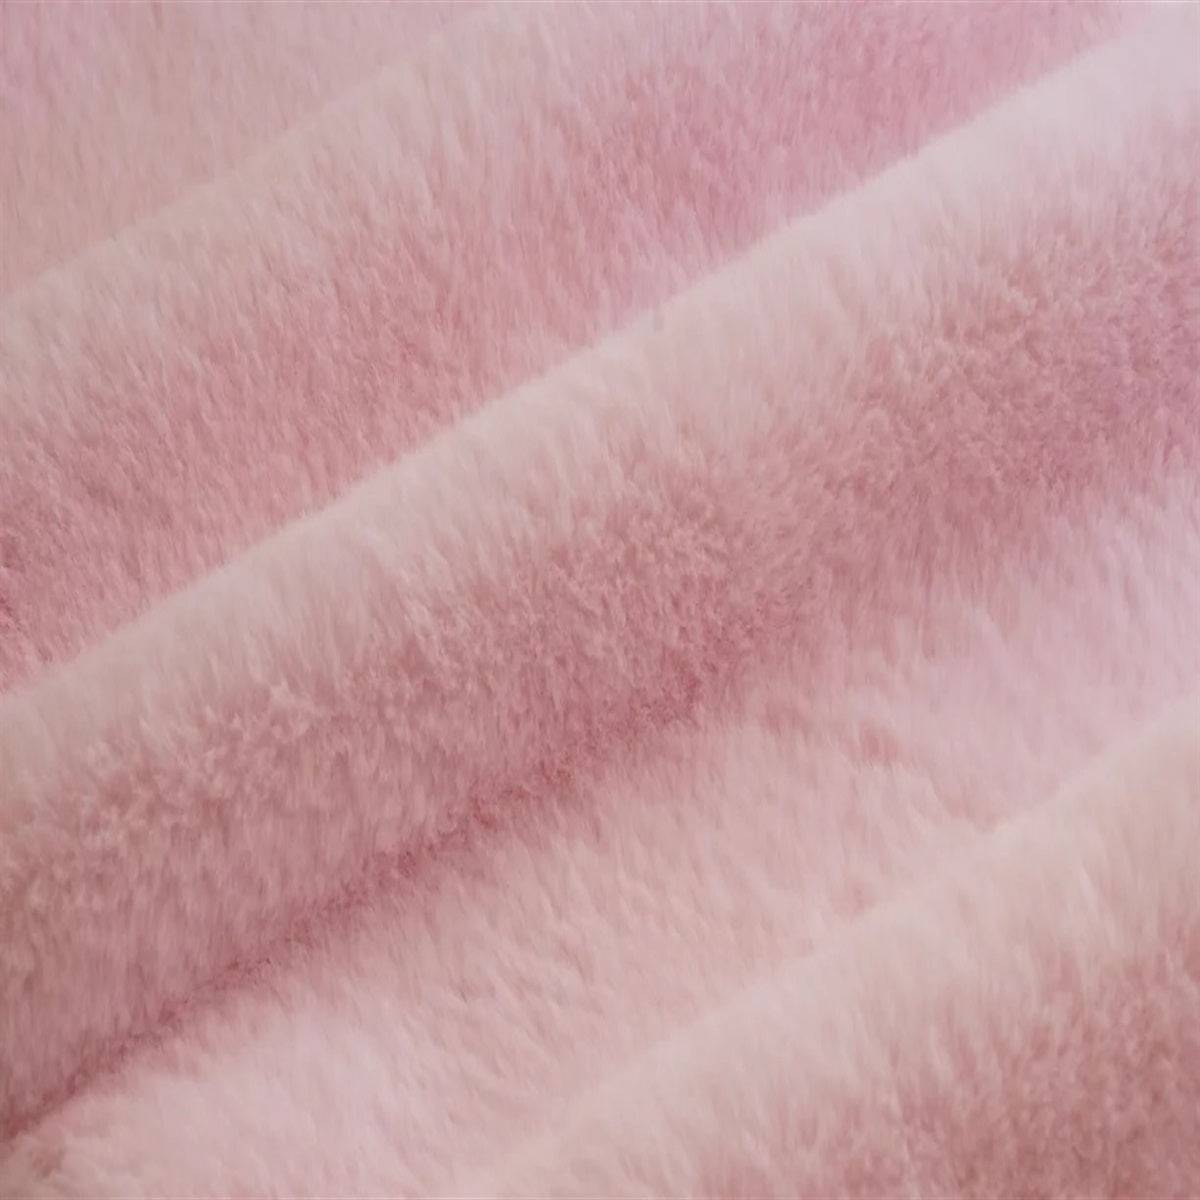 Bunny Thick Minky Fabric By The Roll (20 Yards)ICE FABRICSICE FABRICSPinkBy The Yard (60 inches Wide)Bunny Thick Minky Fabric By The Roll (20 Yards) ICE FABRICS Pink